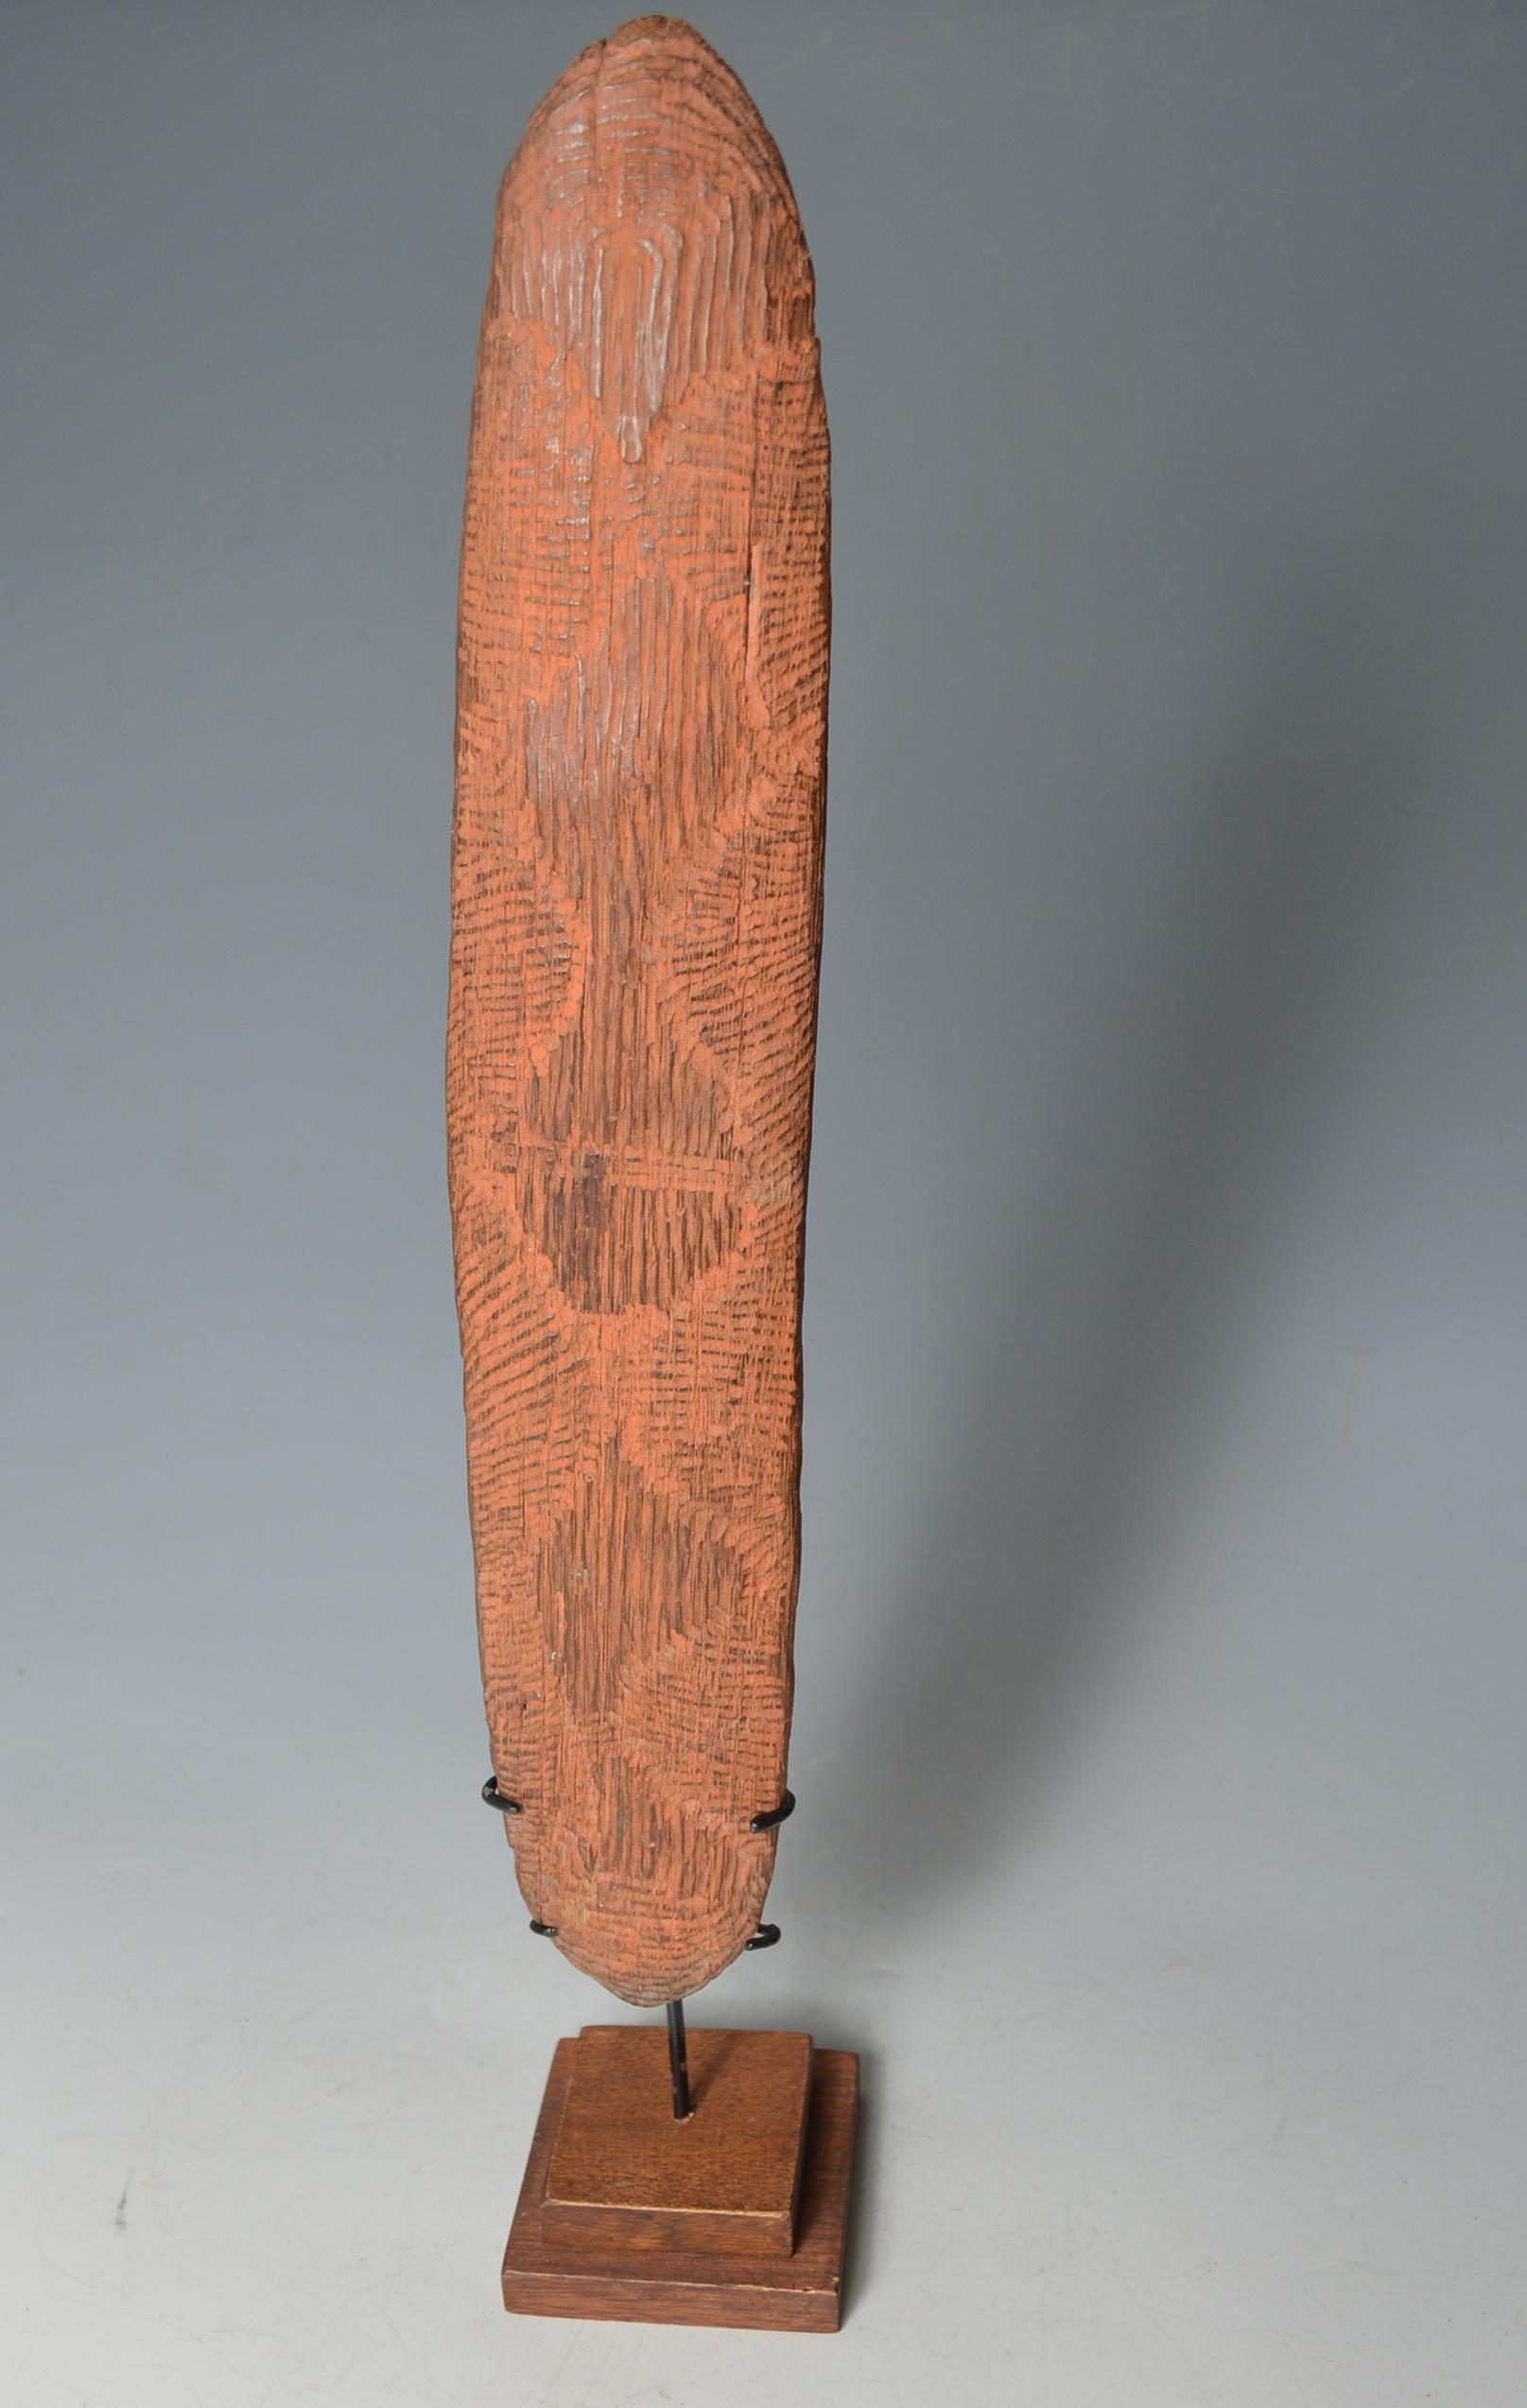 Fine old Australian Aboriginal Churinga or sacred message board
The Churinga is a sacred message board for the Australian aboriginal people
and holds religious messages sacred to the tribe or individual who made it and would be stored in a sacred